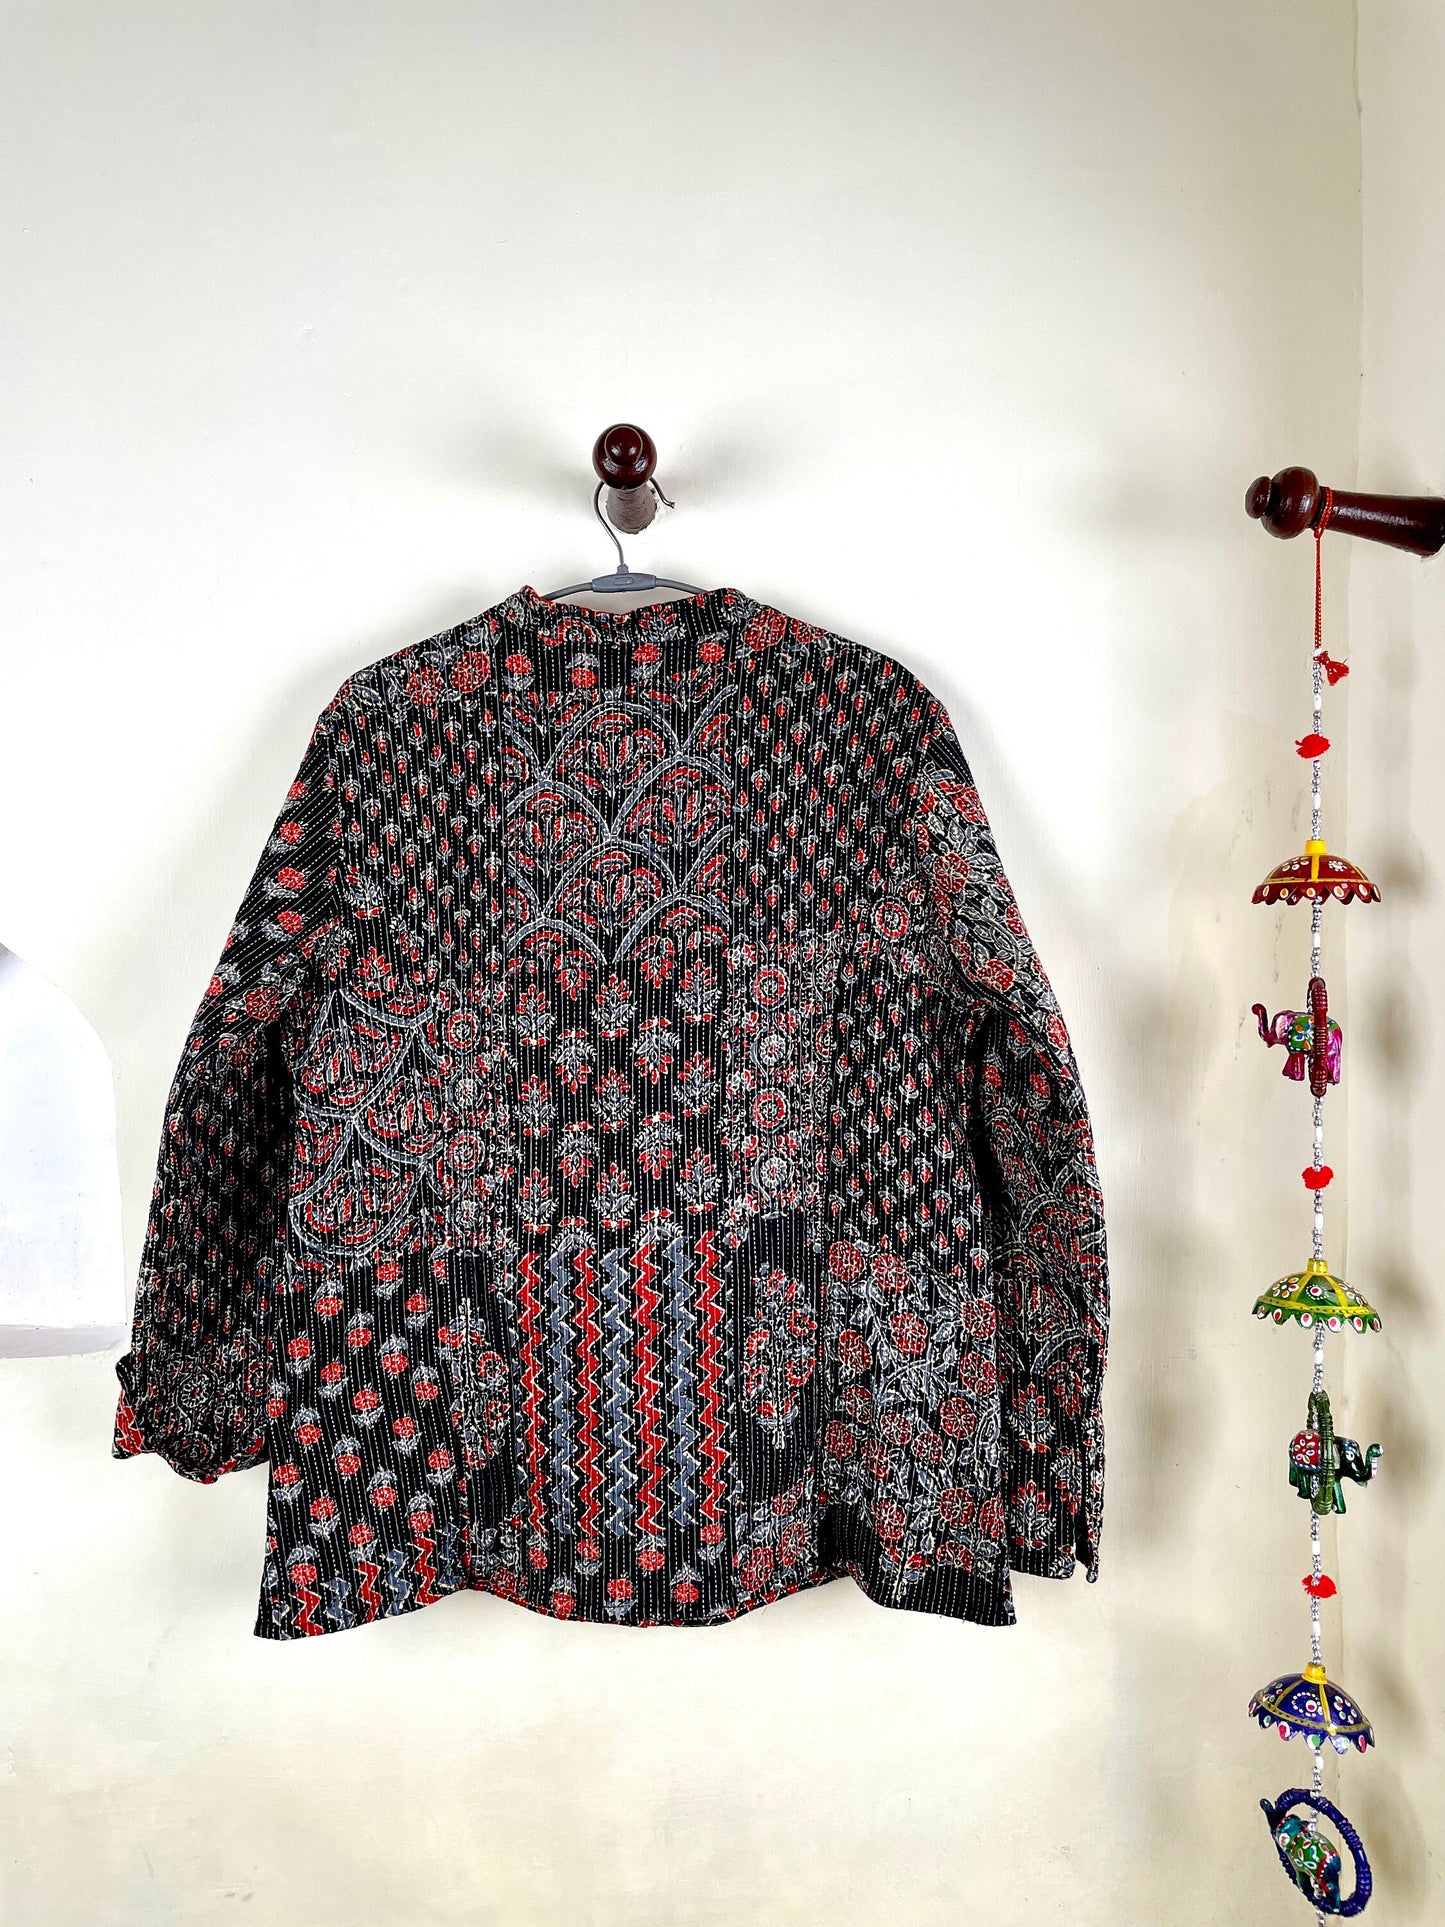 Indian Handmade Quilted Kantha Cotton Fabric Jacket Stylish Black & Red Floral Women's Coat, Reversible Waistcoat for Her